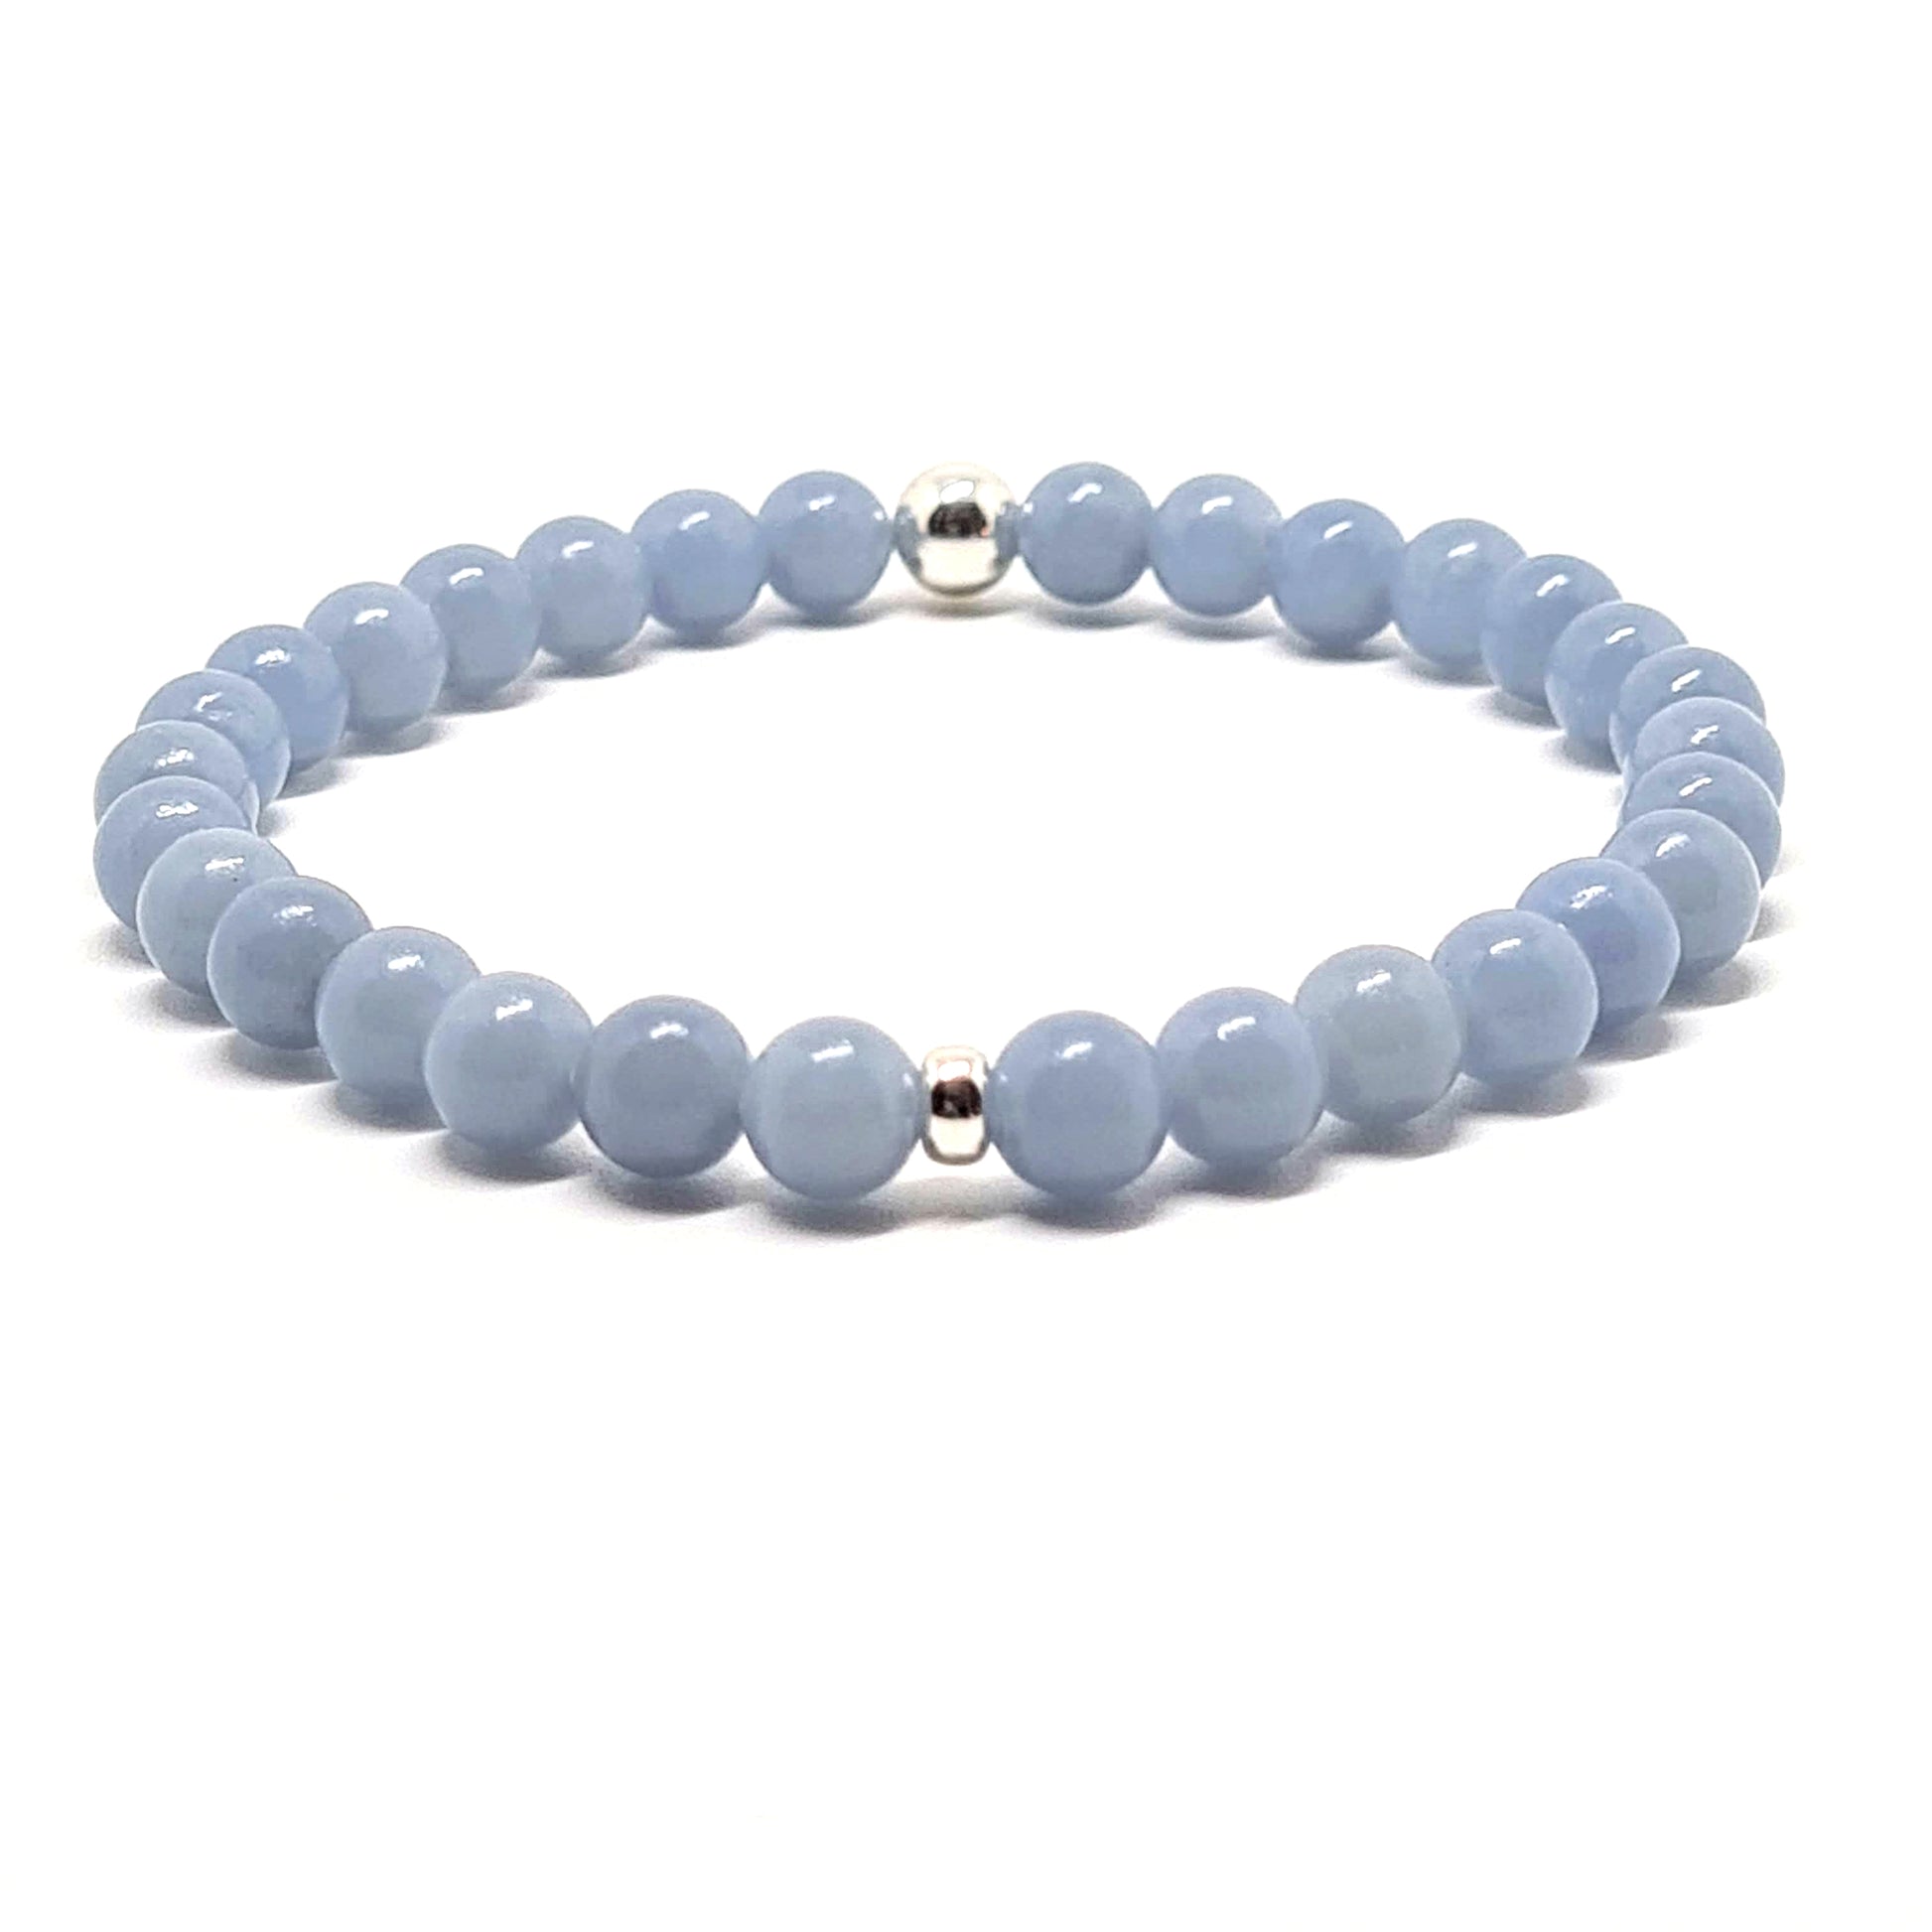 A Angelite gemstone bracelet with 925 silver accessories 